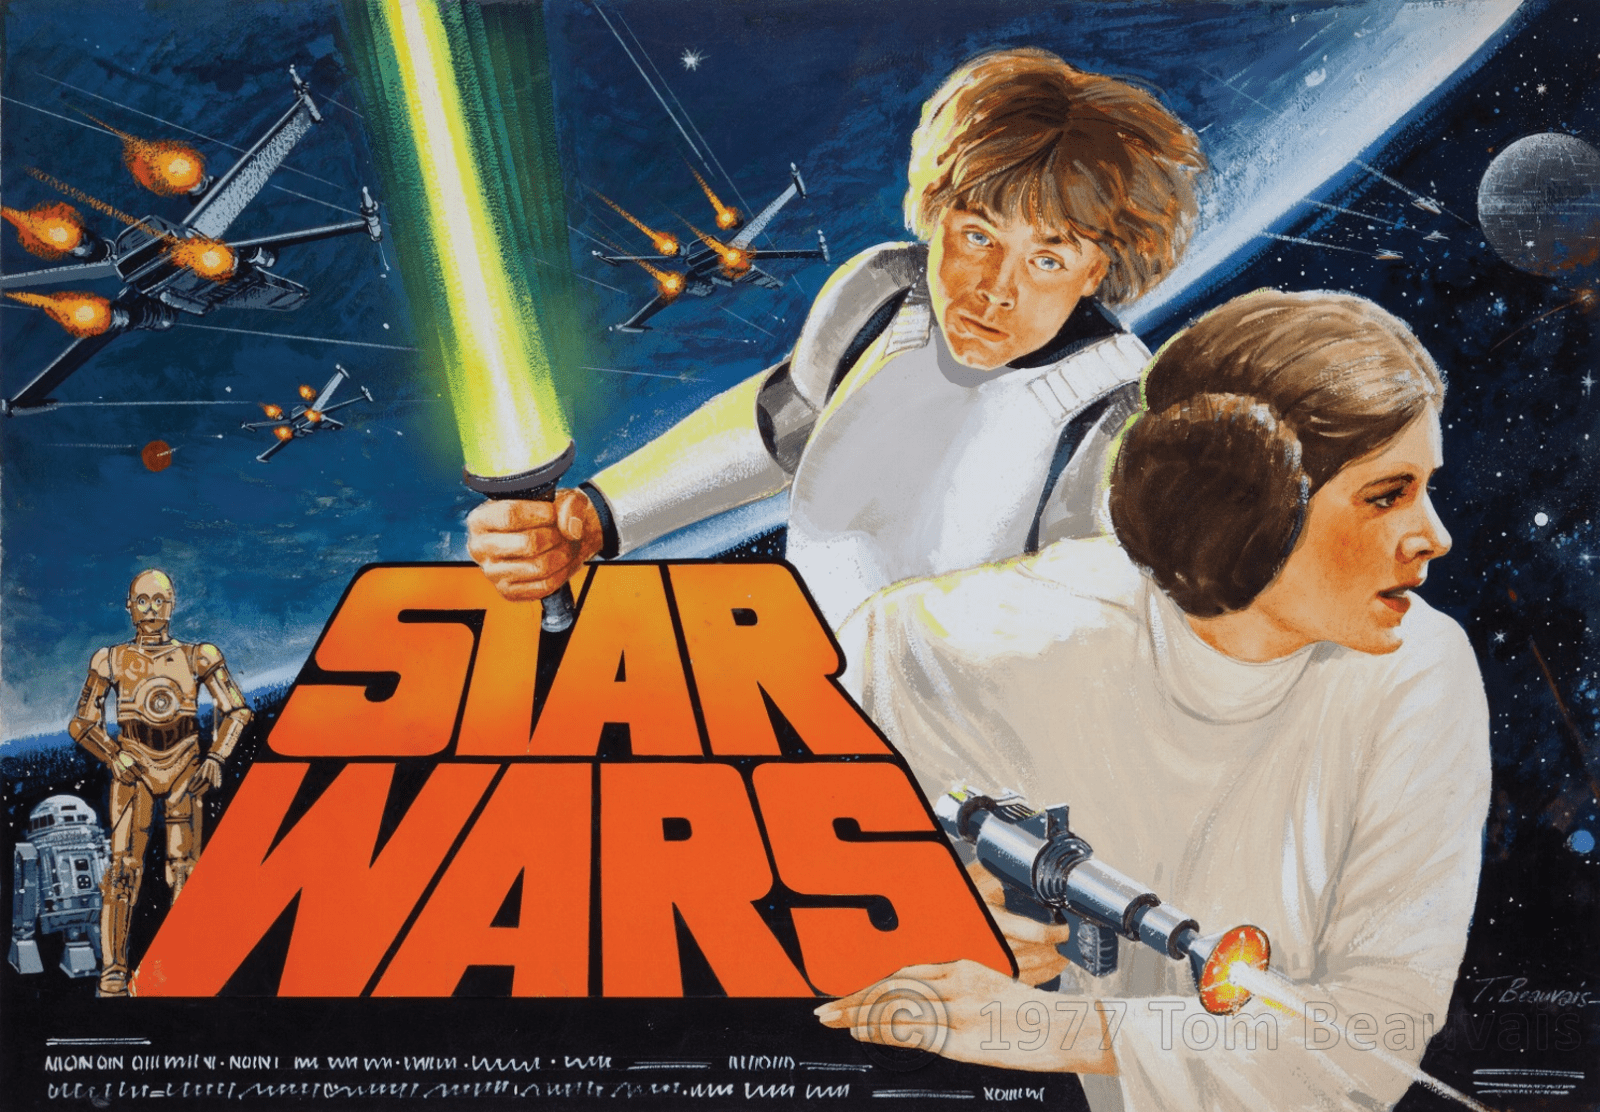 Tom-Beauvais-Star-Wars-1977.png